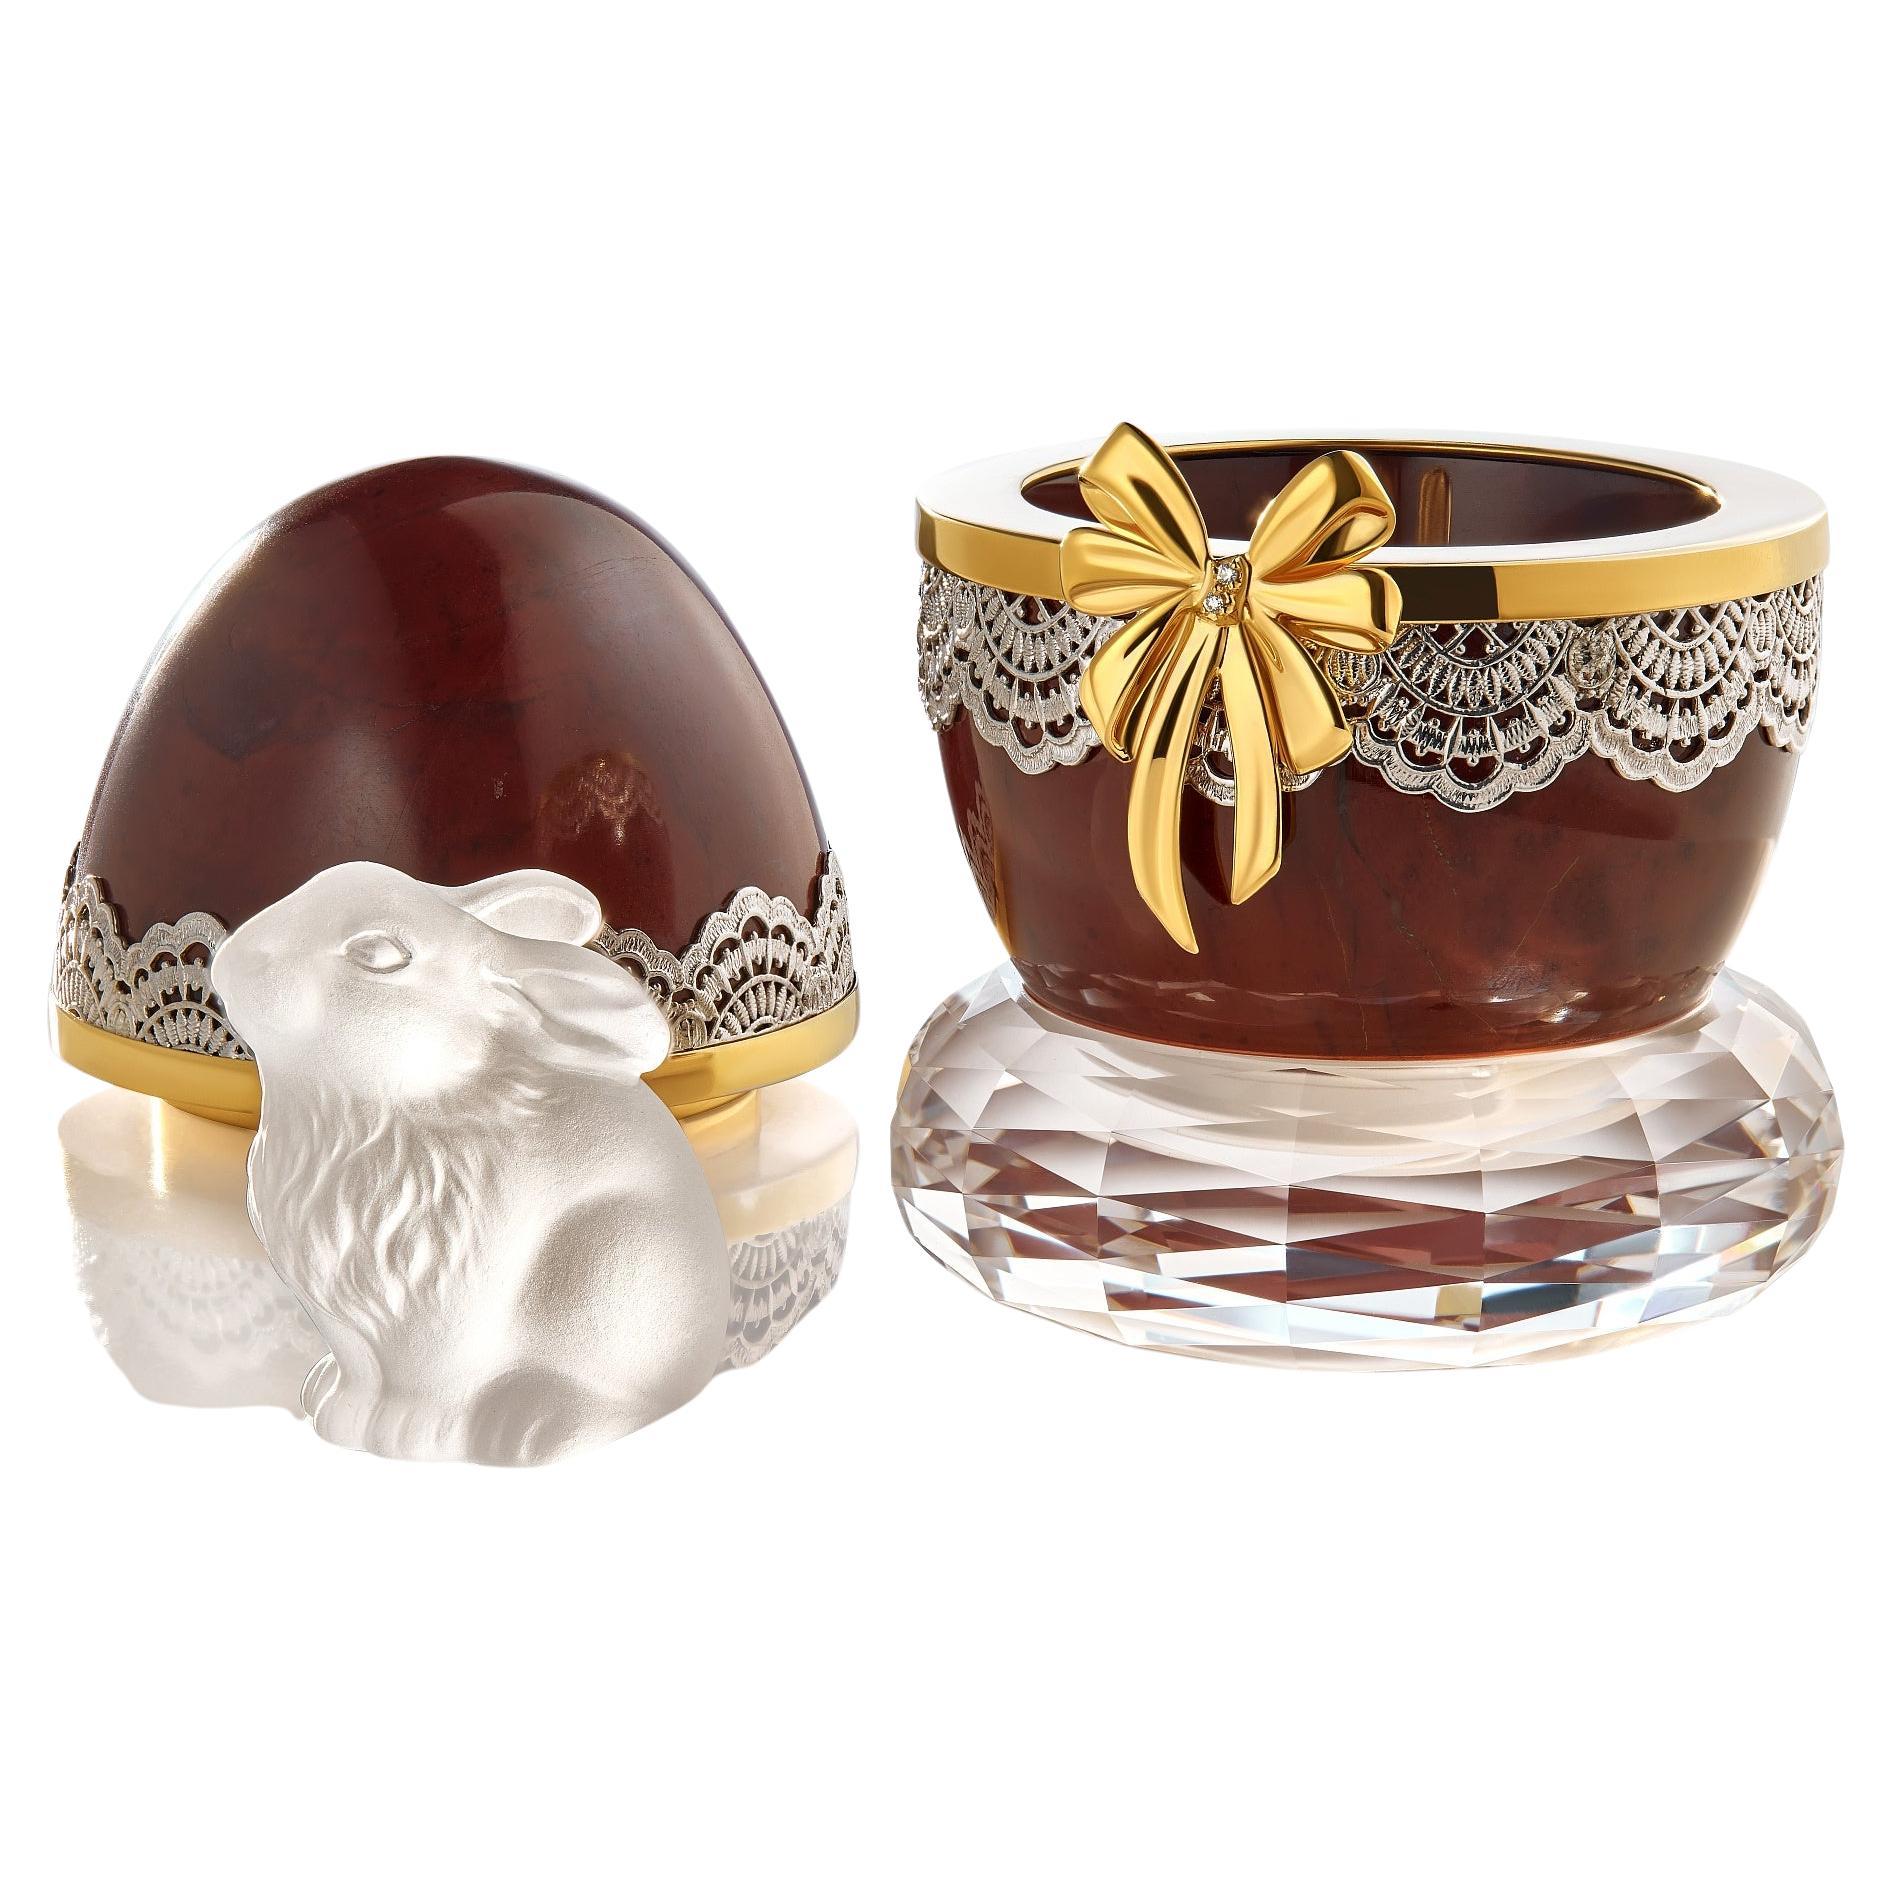 MOISEIKIN Silver Gold Plated Rabbit Easter Egg Miniature For Sale